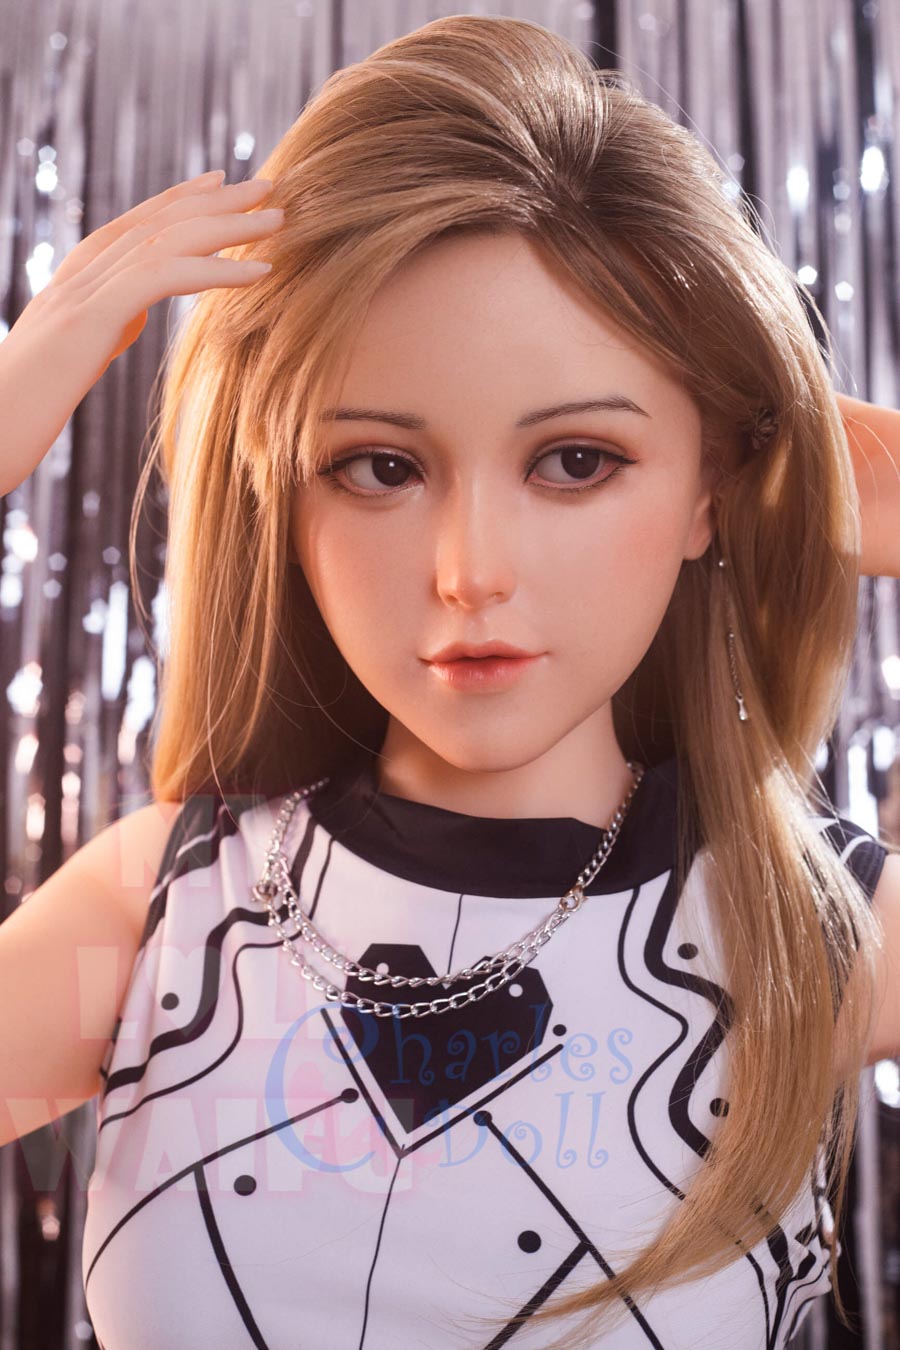 MLW-doll 148B 亞莉莎 Arisa